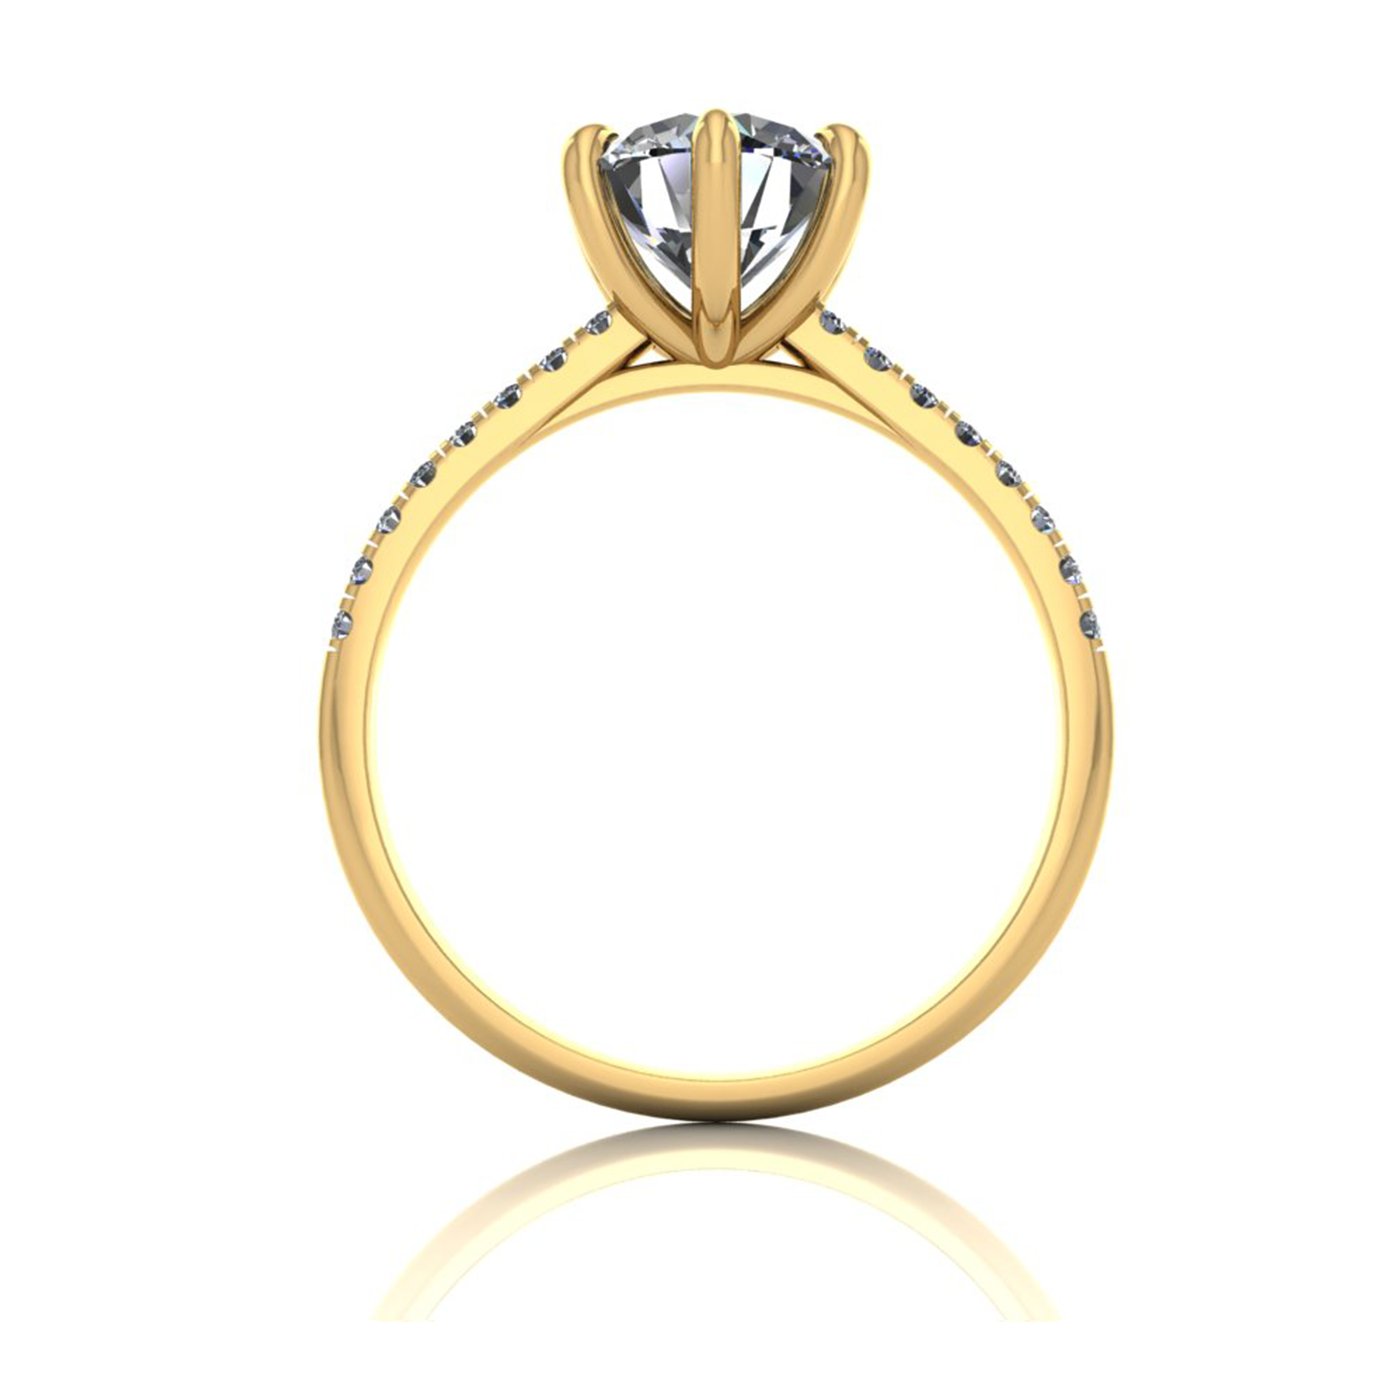 18k yellow gold 1,50 ct 6 prongs round cut diamond engagement ring with whisper thin pavÉ set band